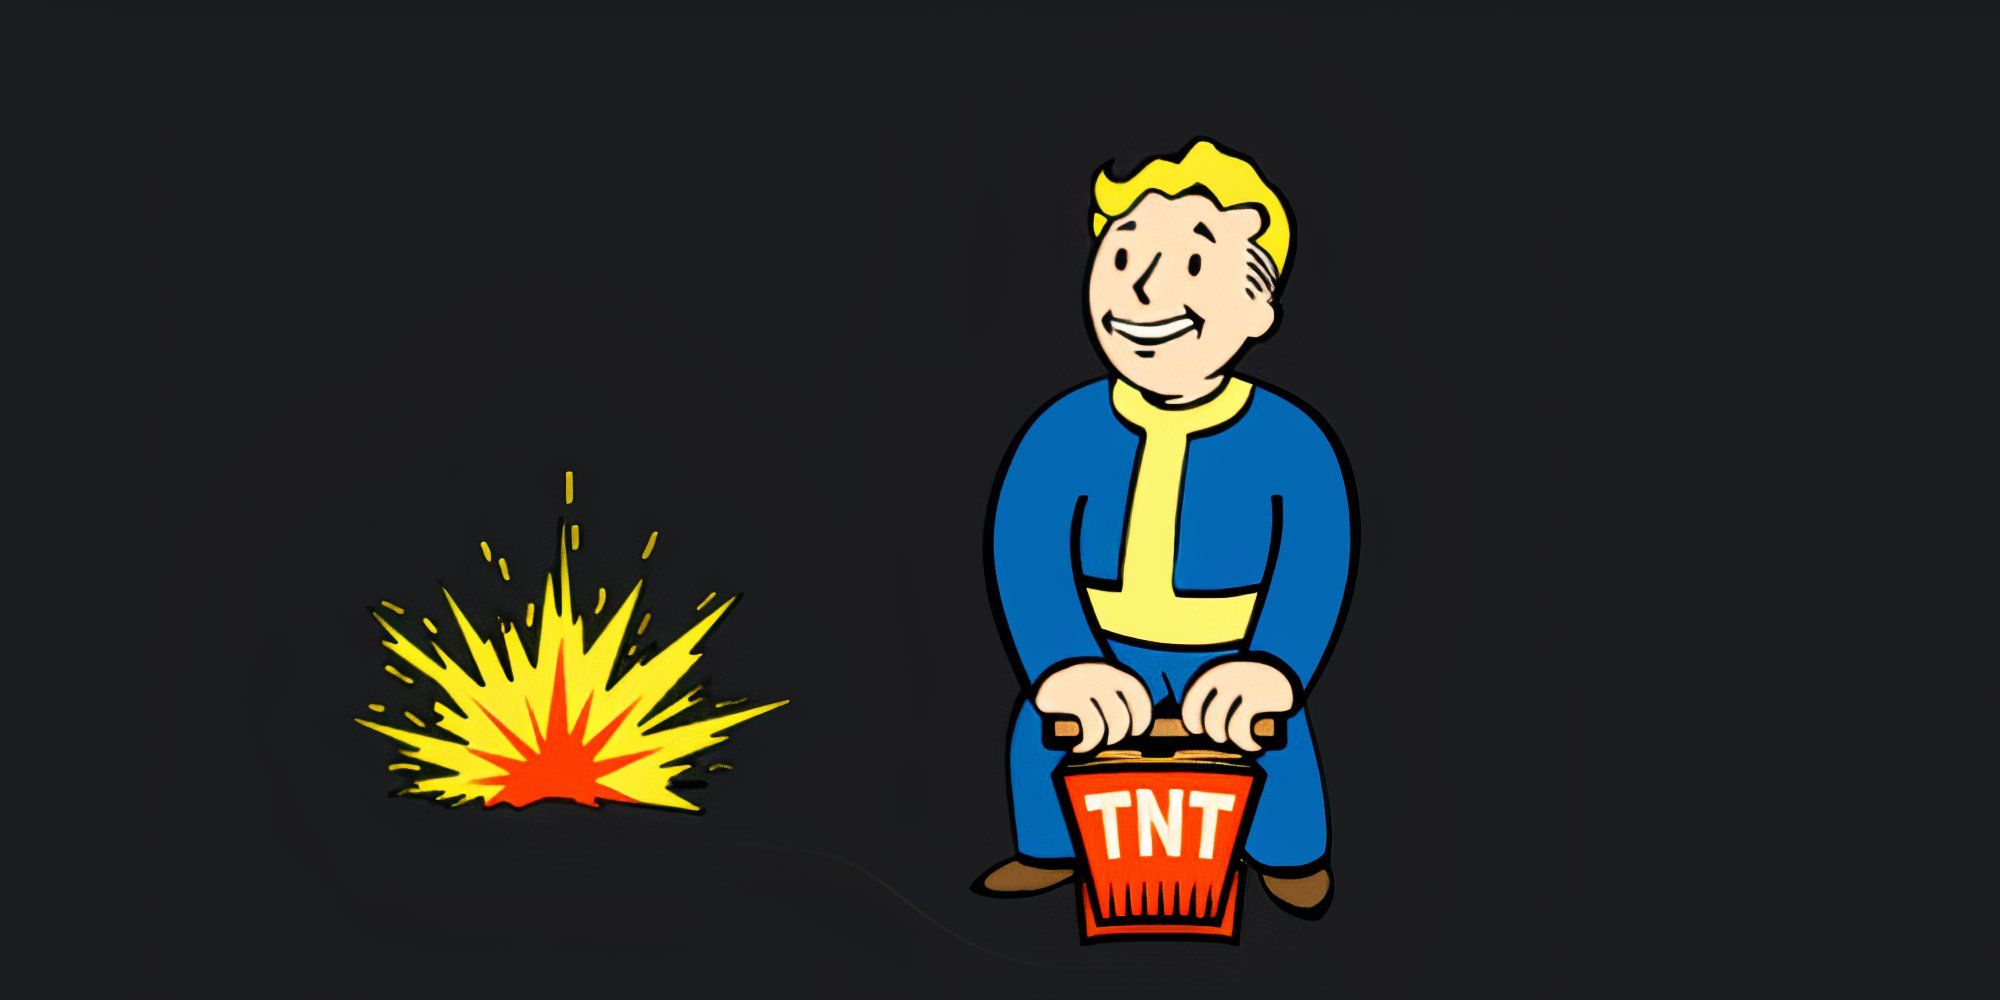 Vault Boy pushes a TNT lever to ignite an explosion behind him